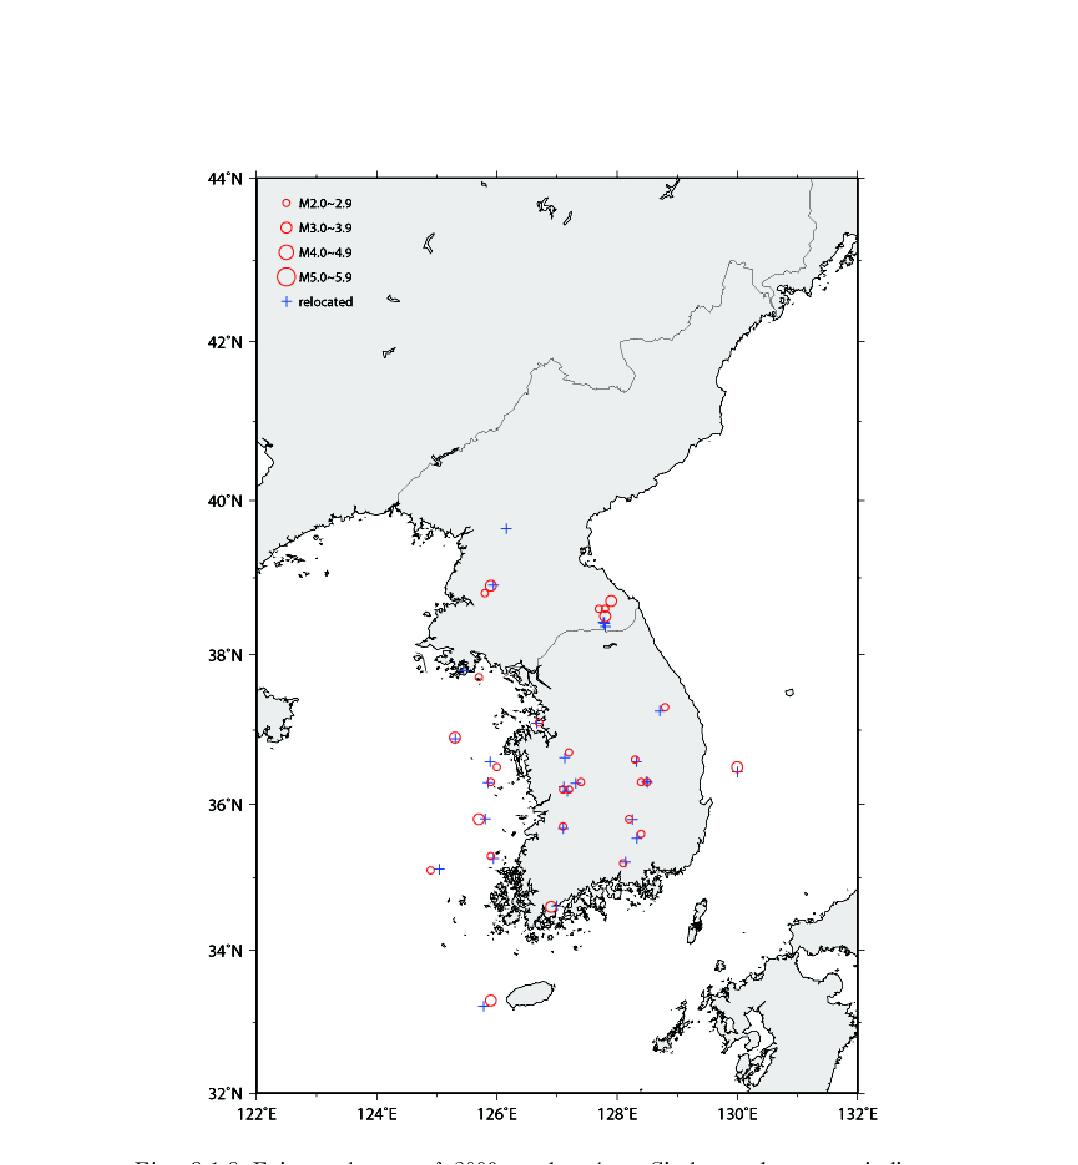 Epicentral map of 2000 earthquakes. Circles and crosses indicate the locations determined by KMA and using HYPOELLIPSE, respectively, and the sizes of circles vary depending on magnitude.